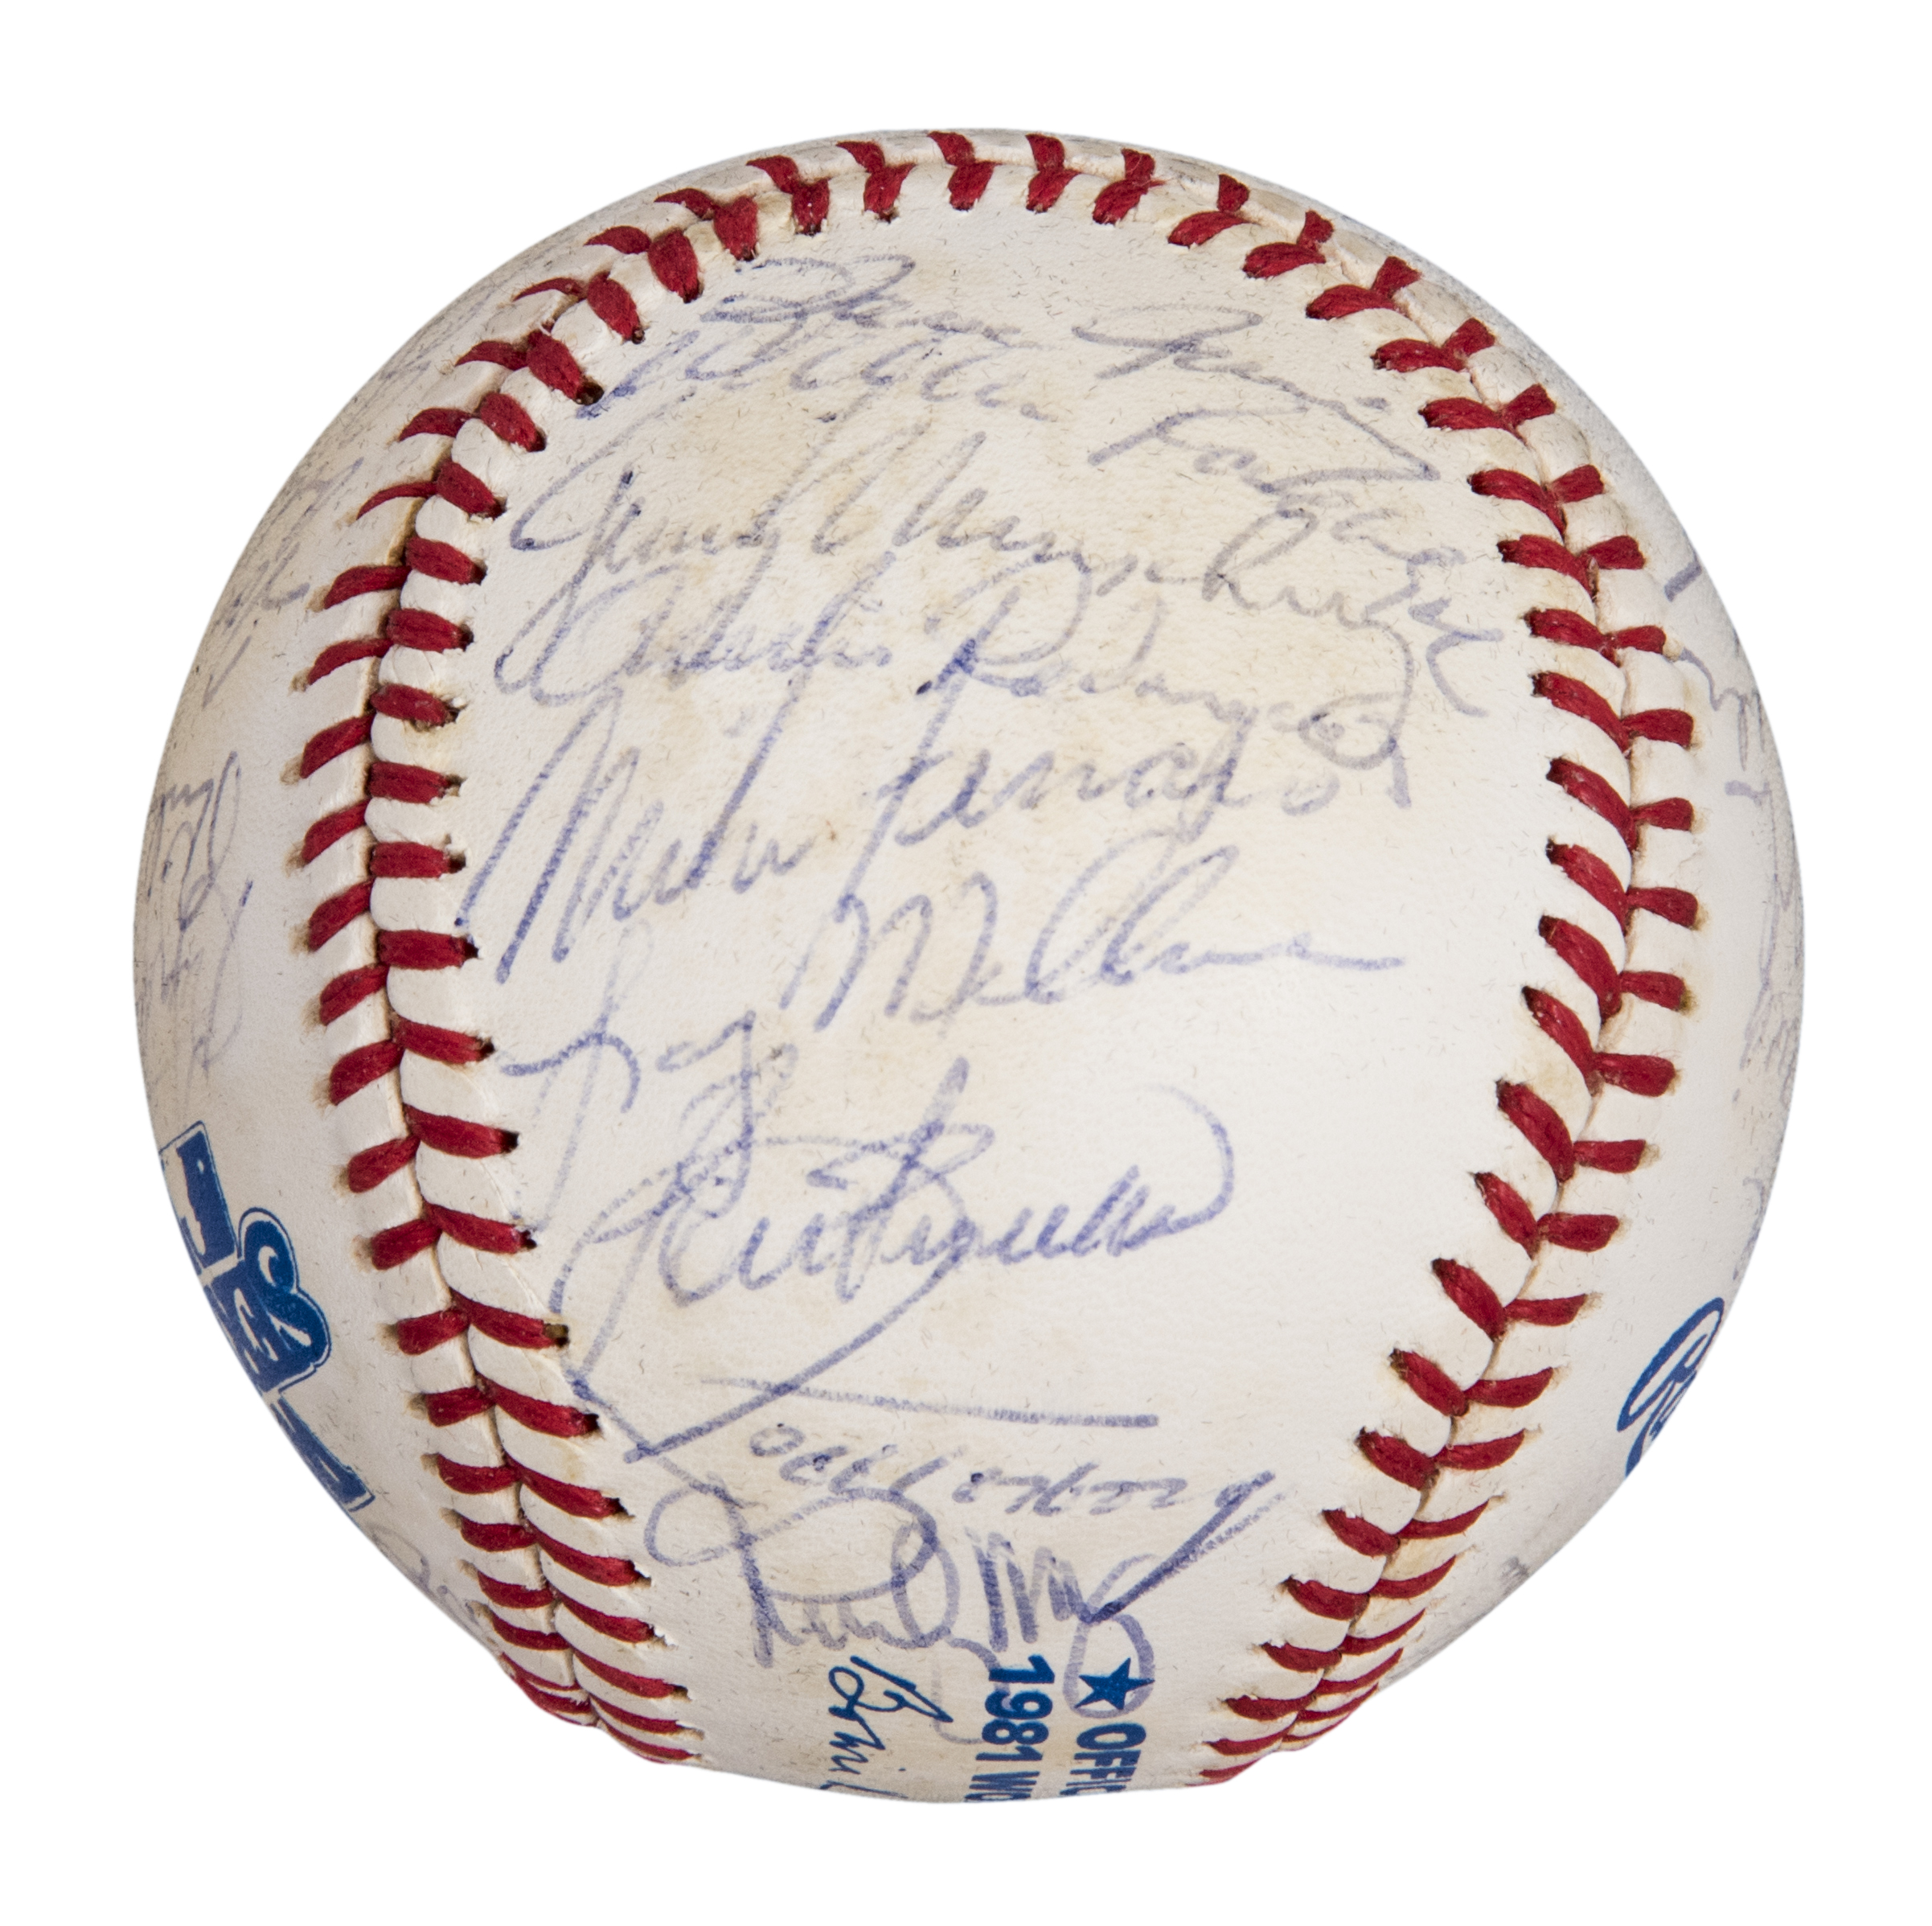 Lot Detail - 1981 American League Champions New York Yankees Team Signed OML Kuhn ...2403 x 2395